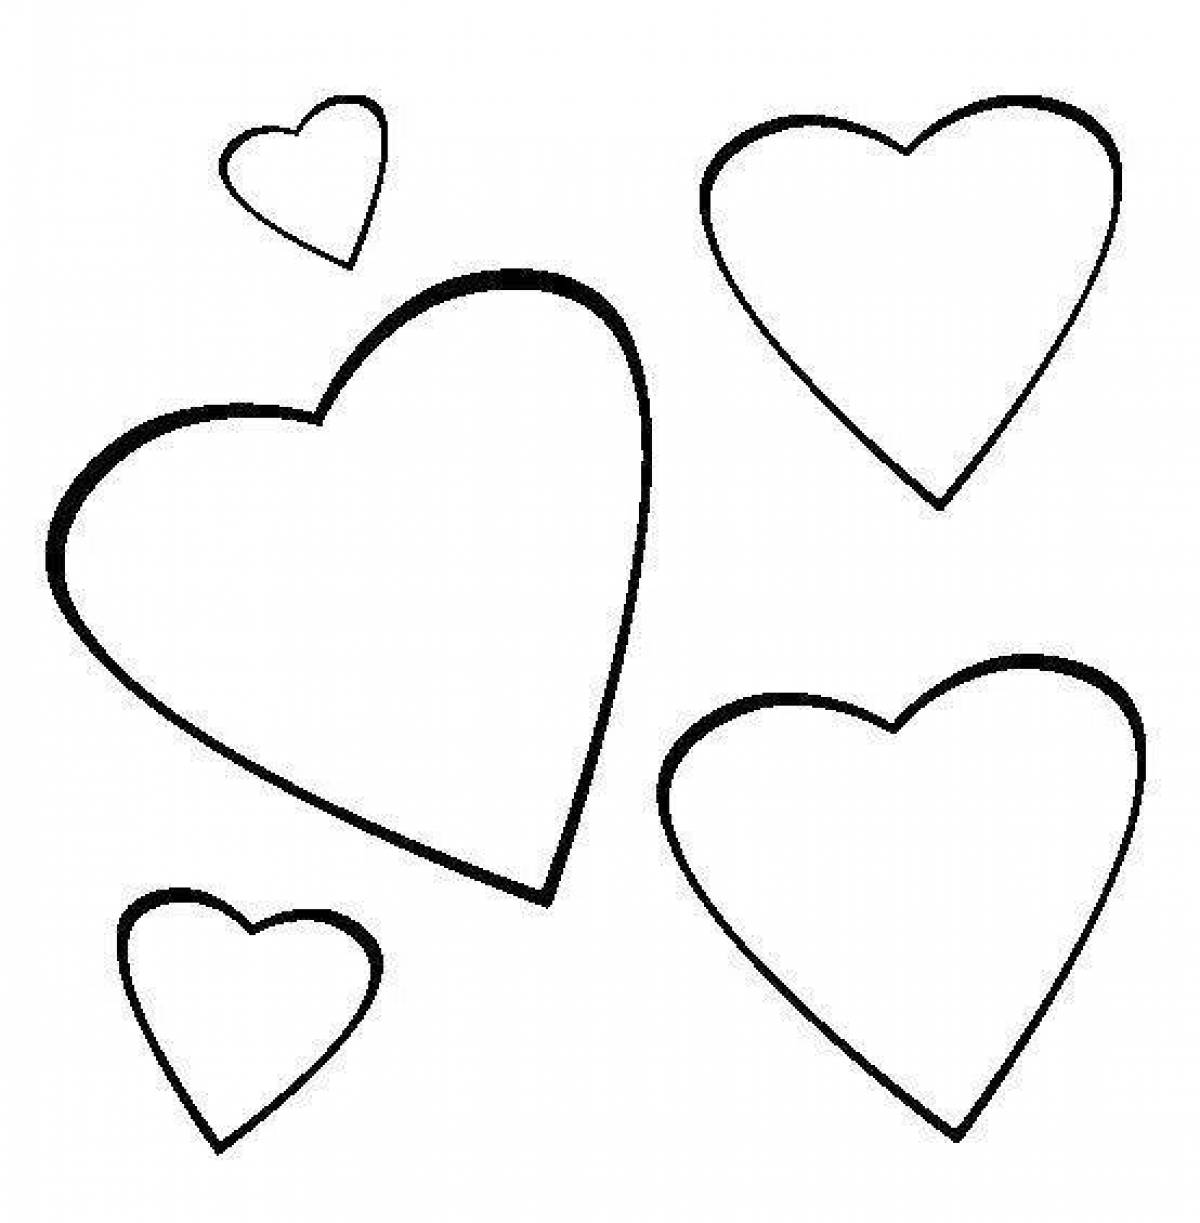 Adorable many hearts coloring page